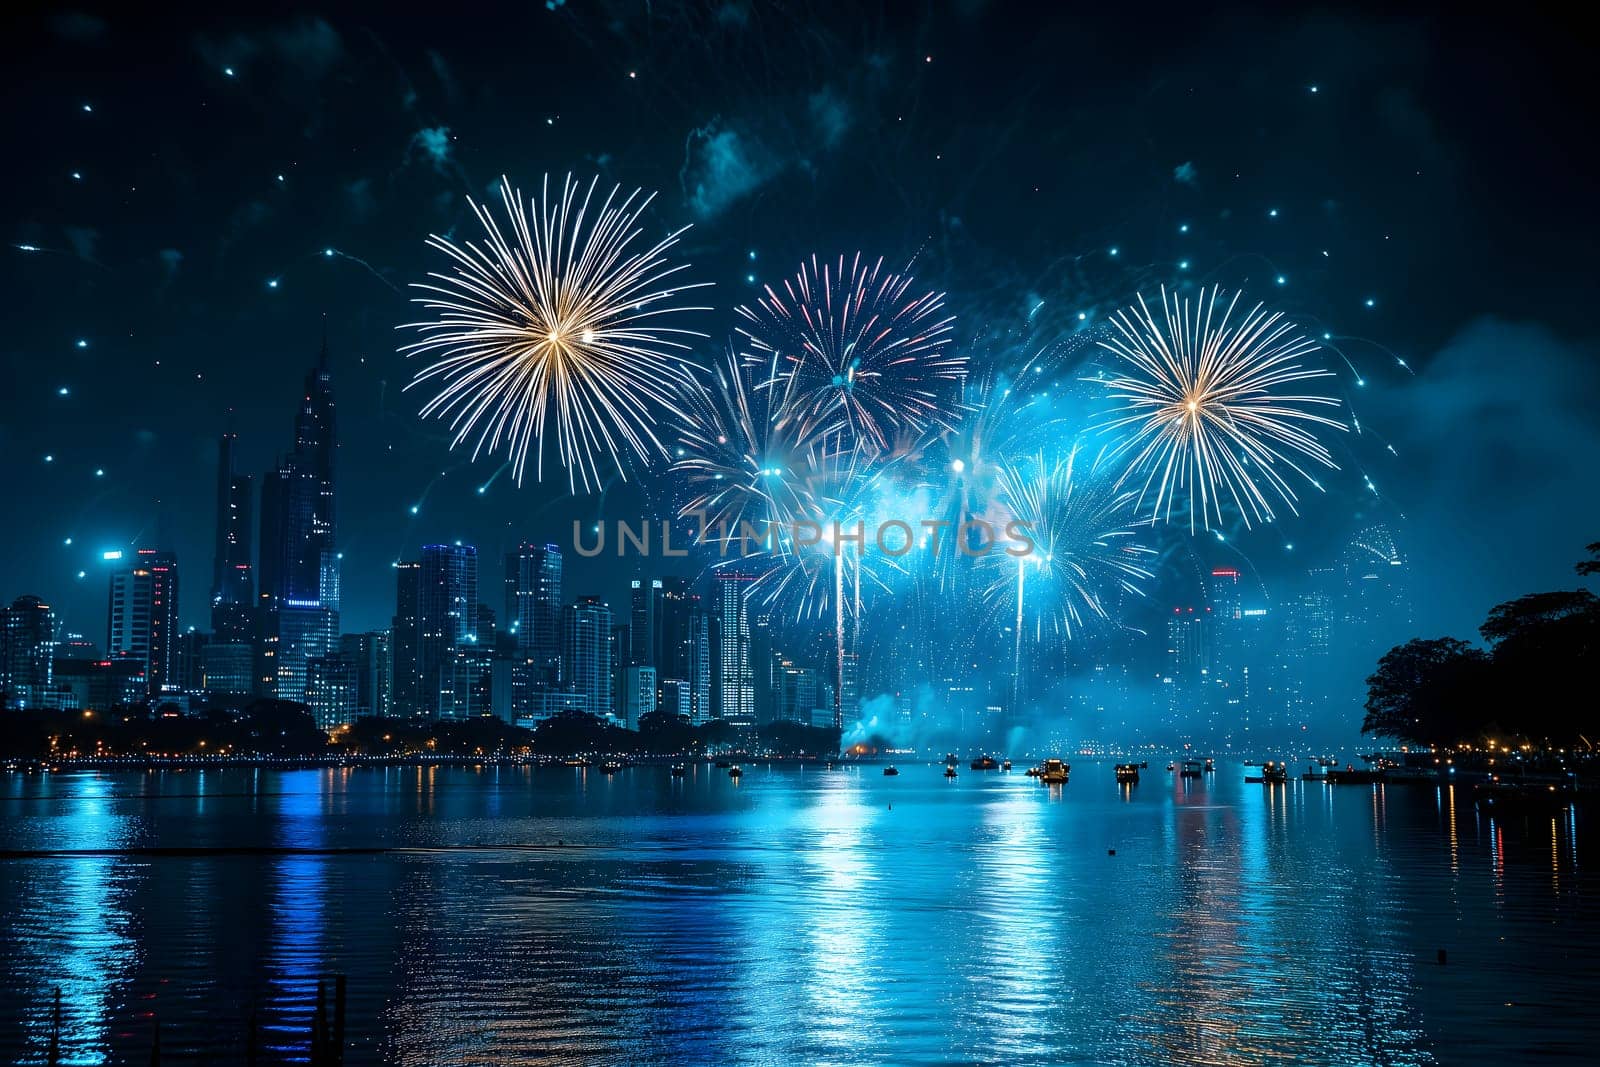 A spectacular image of fireworks illuminating the night sky over a city by z1b